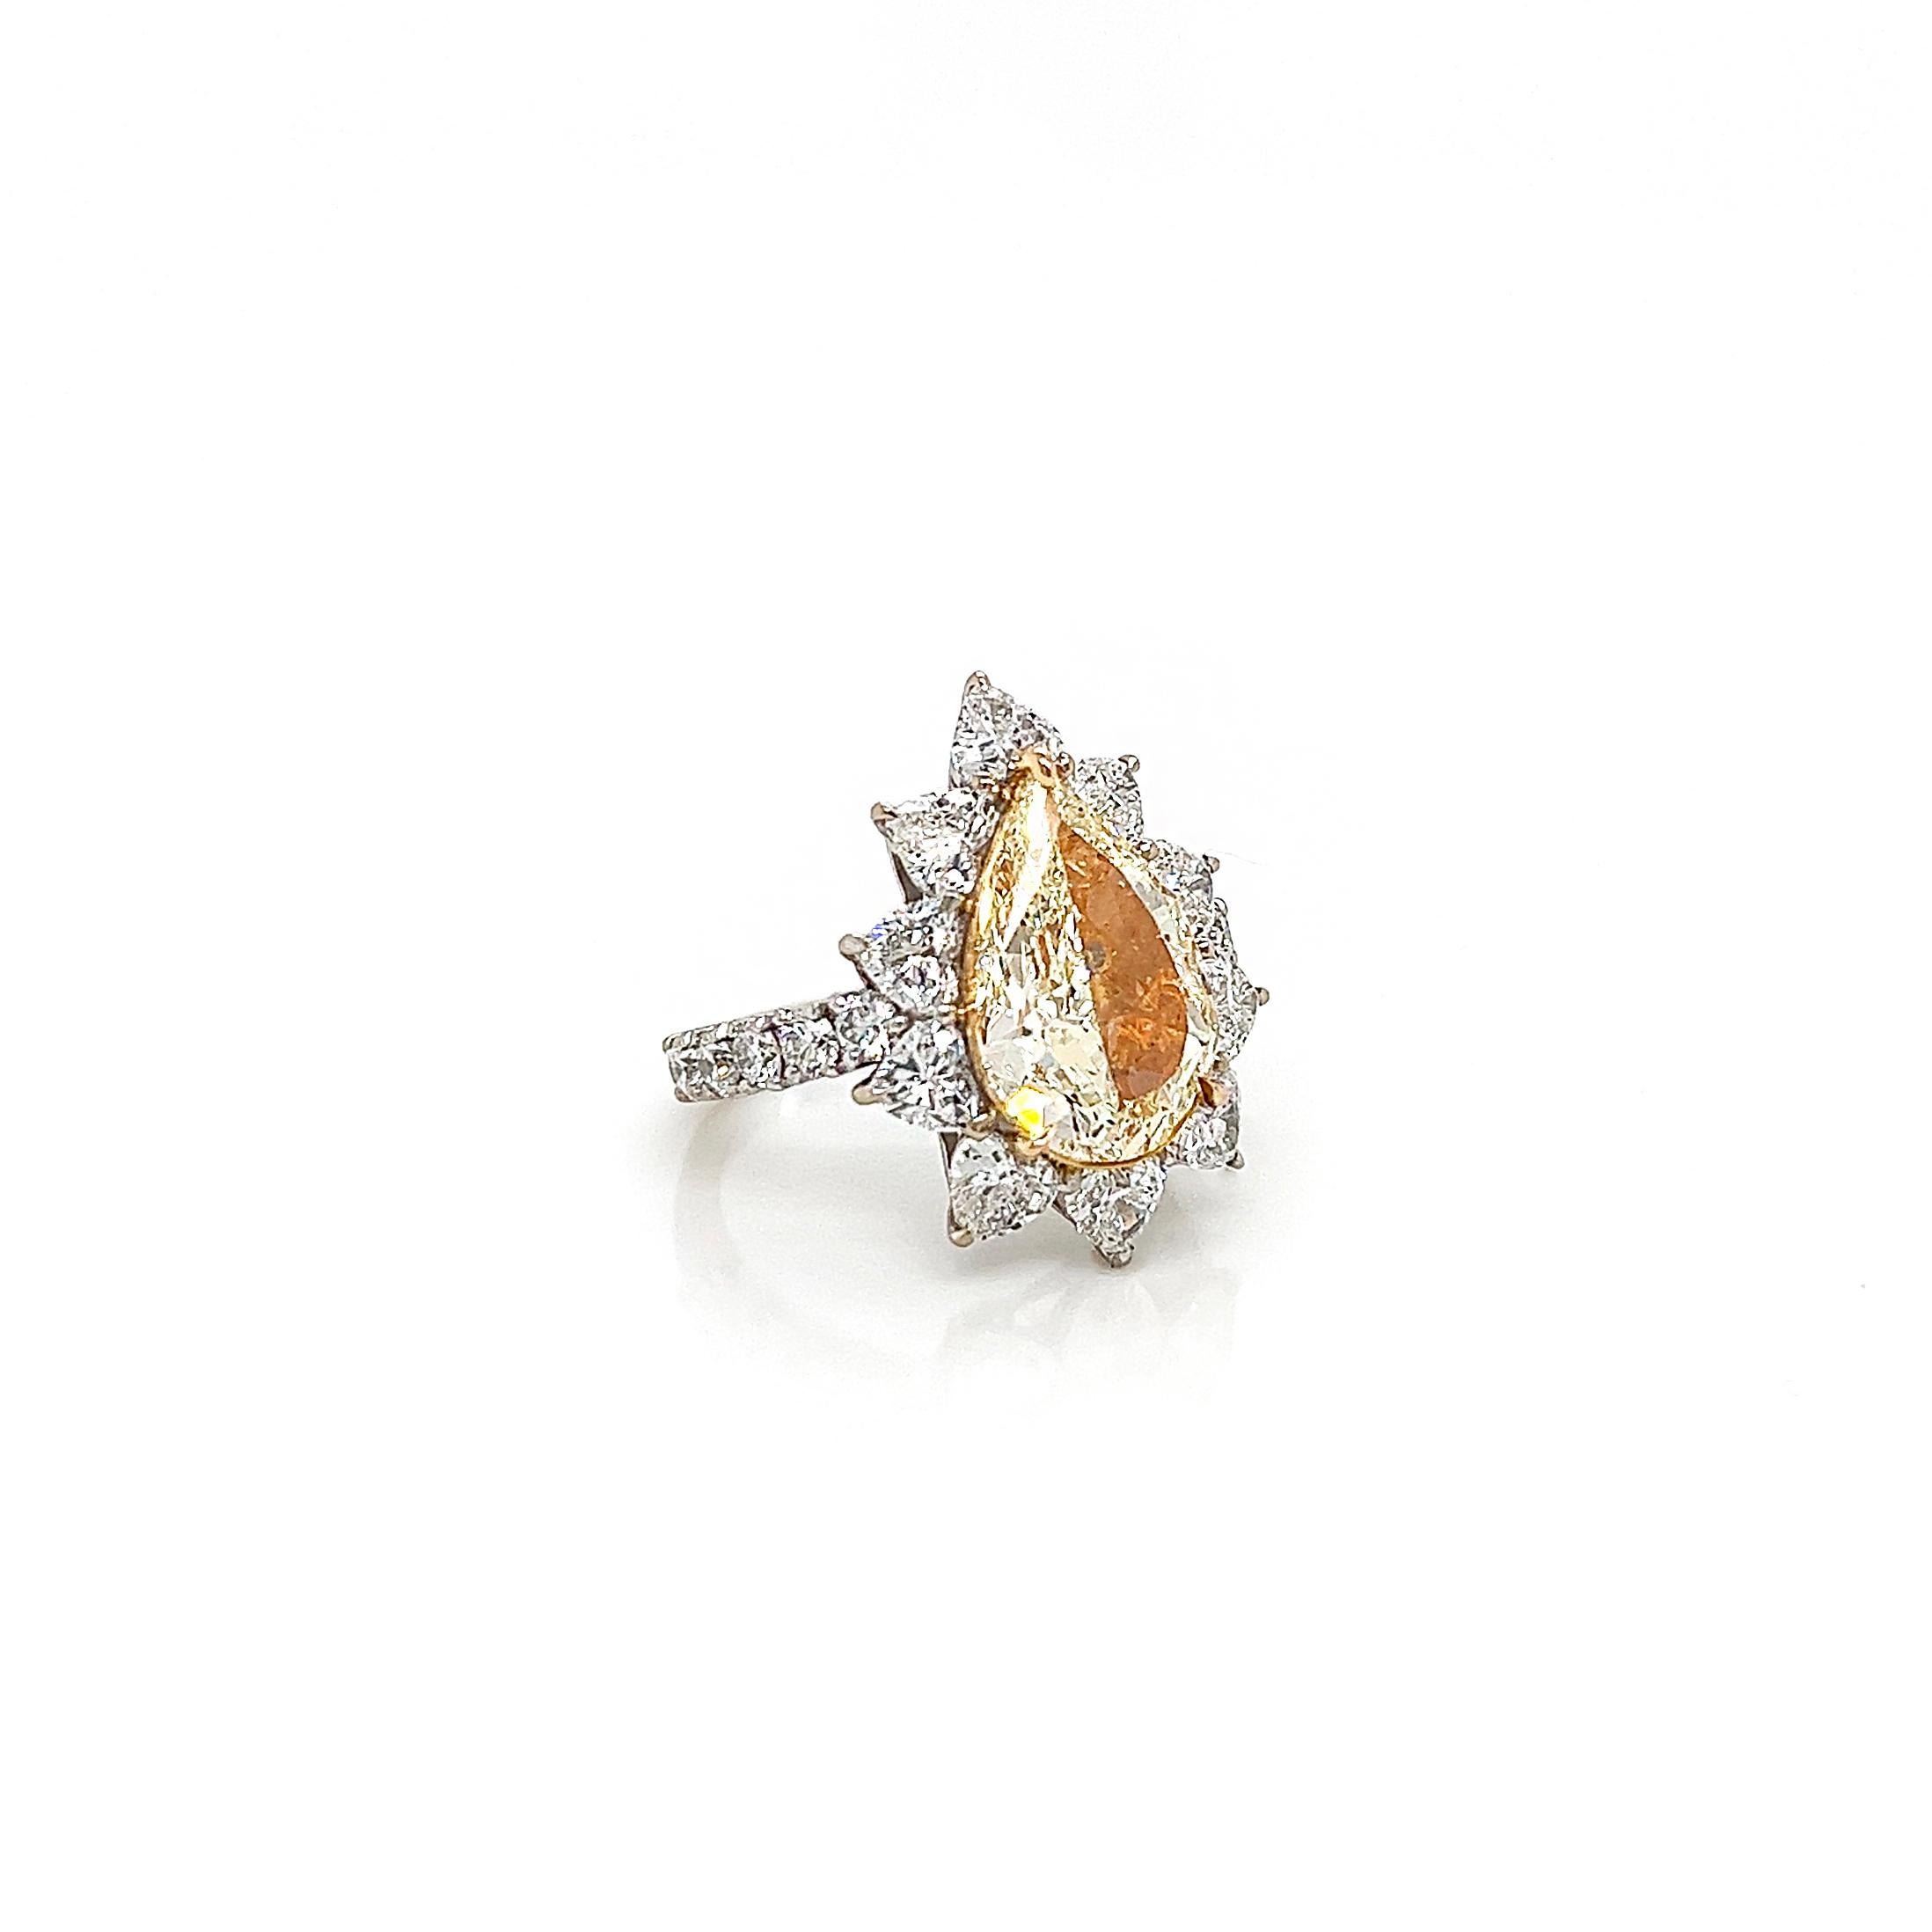 7.26 Total Carat Pear Shaped Halo GIA-certified Yellow Natural Diamond Ring

Since it’s not practical to call it quits on reality and retreat to Windermere Island, consider this your temporary solution. Four carat fancy yellow sunny diamond escape.